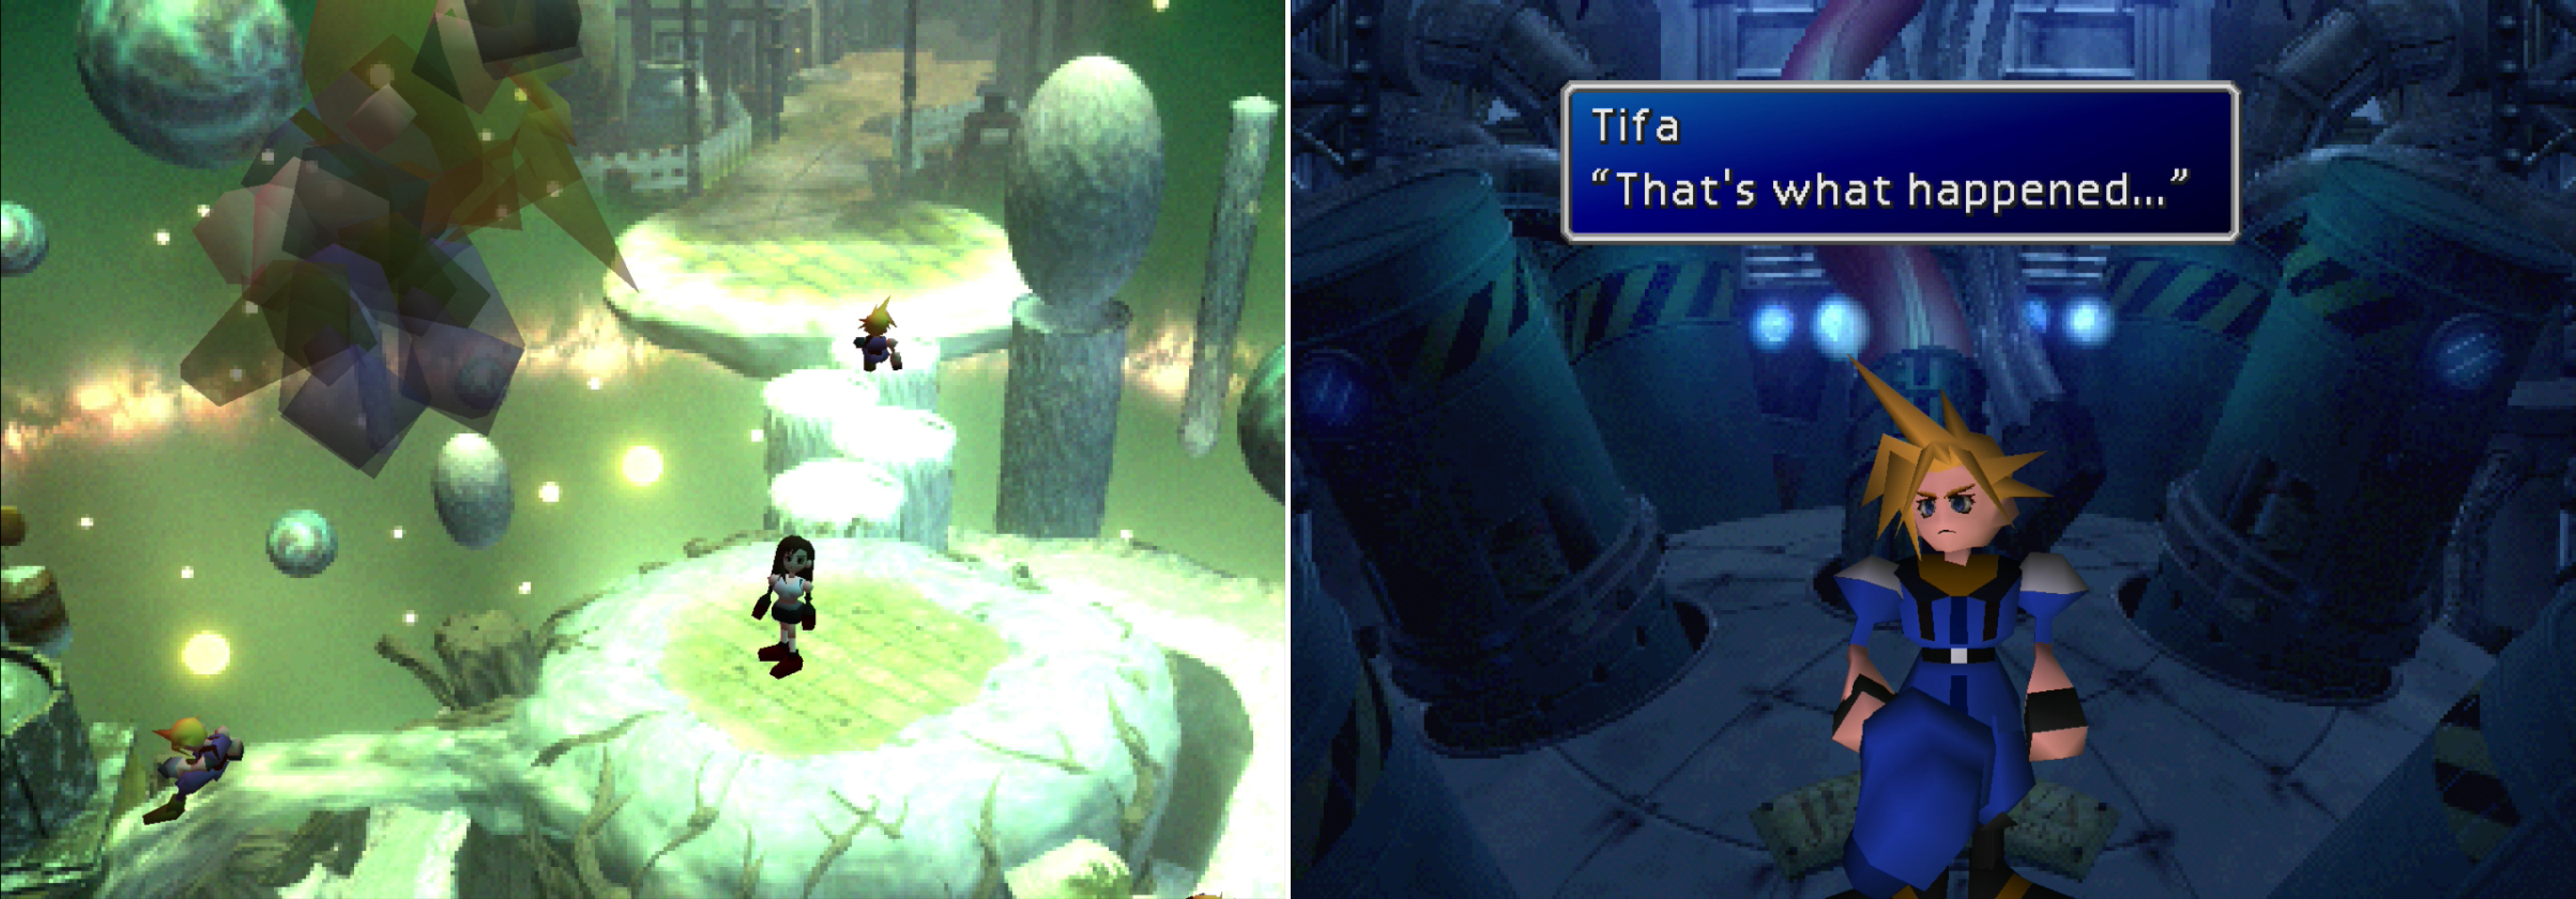 Tifa will have to help Cloud reassemble the broken fragments of his consciousness in the Lifestream (left). After picking through Cloud’s repressed memories, the truth will finally be revealed (right).